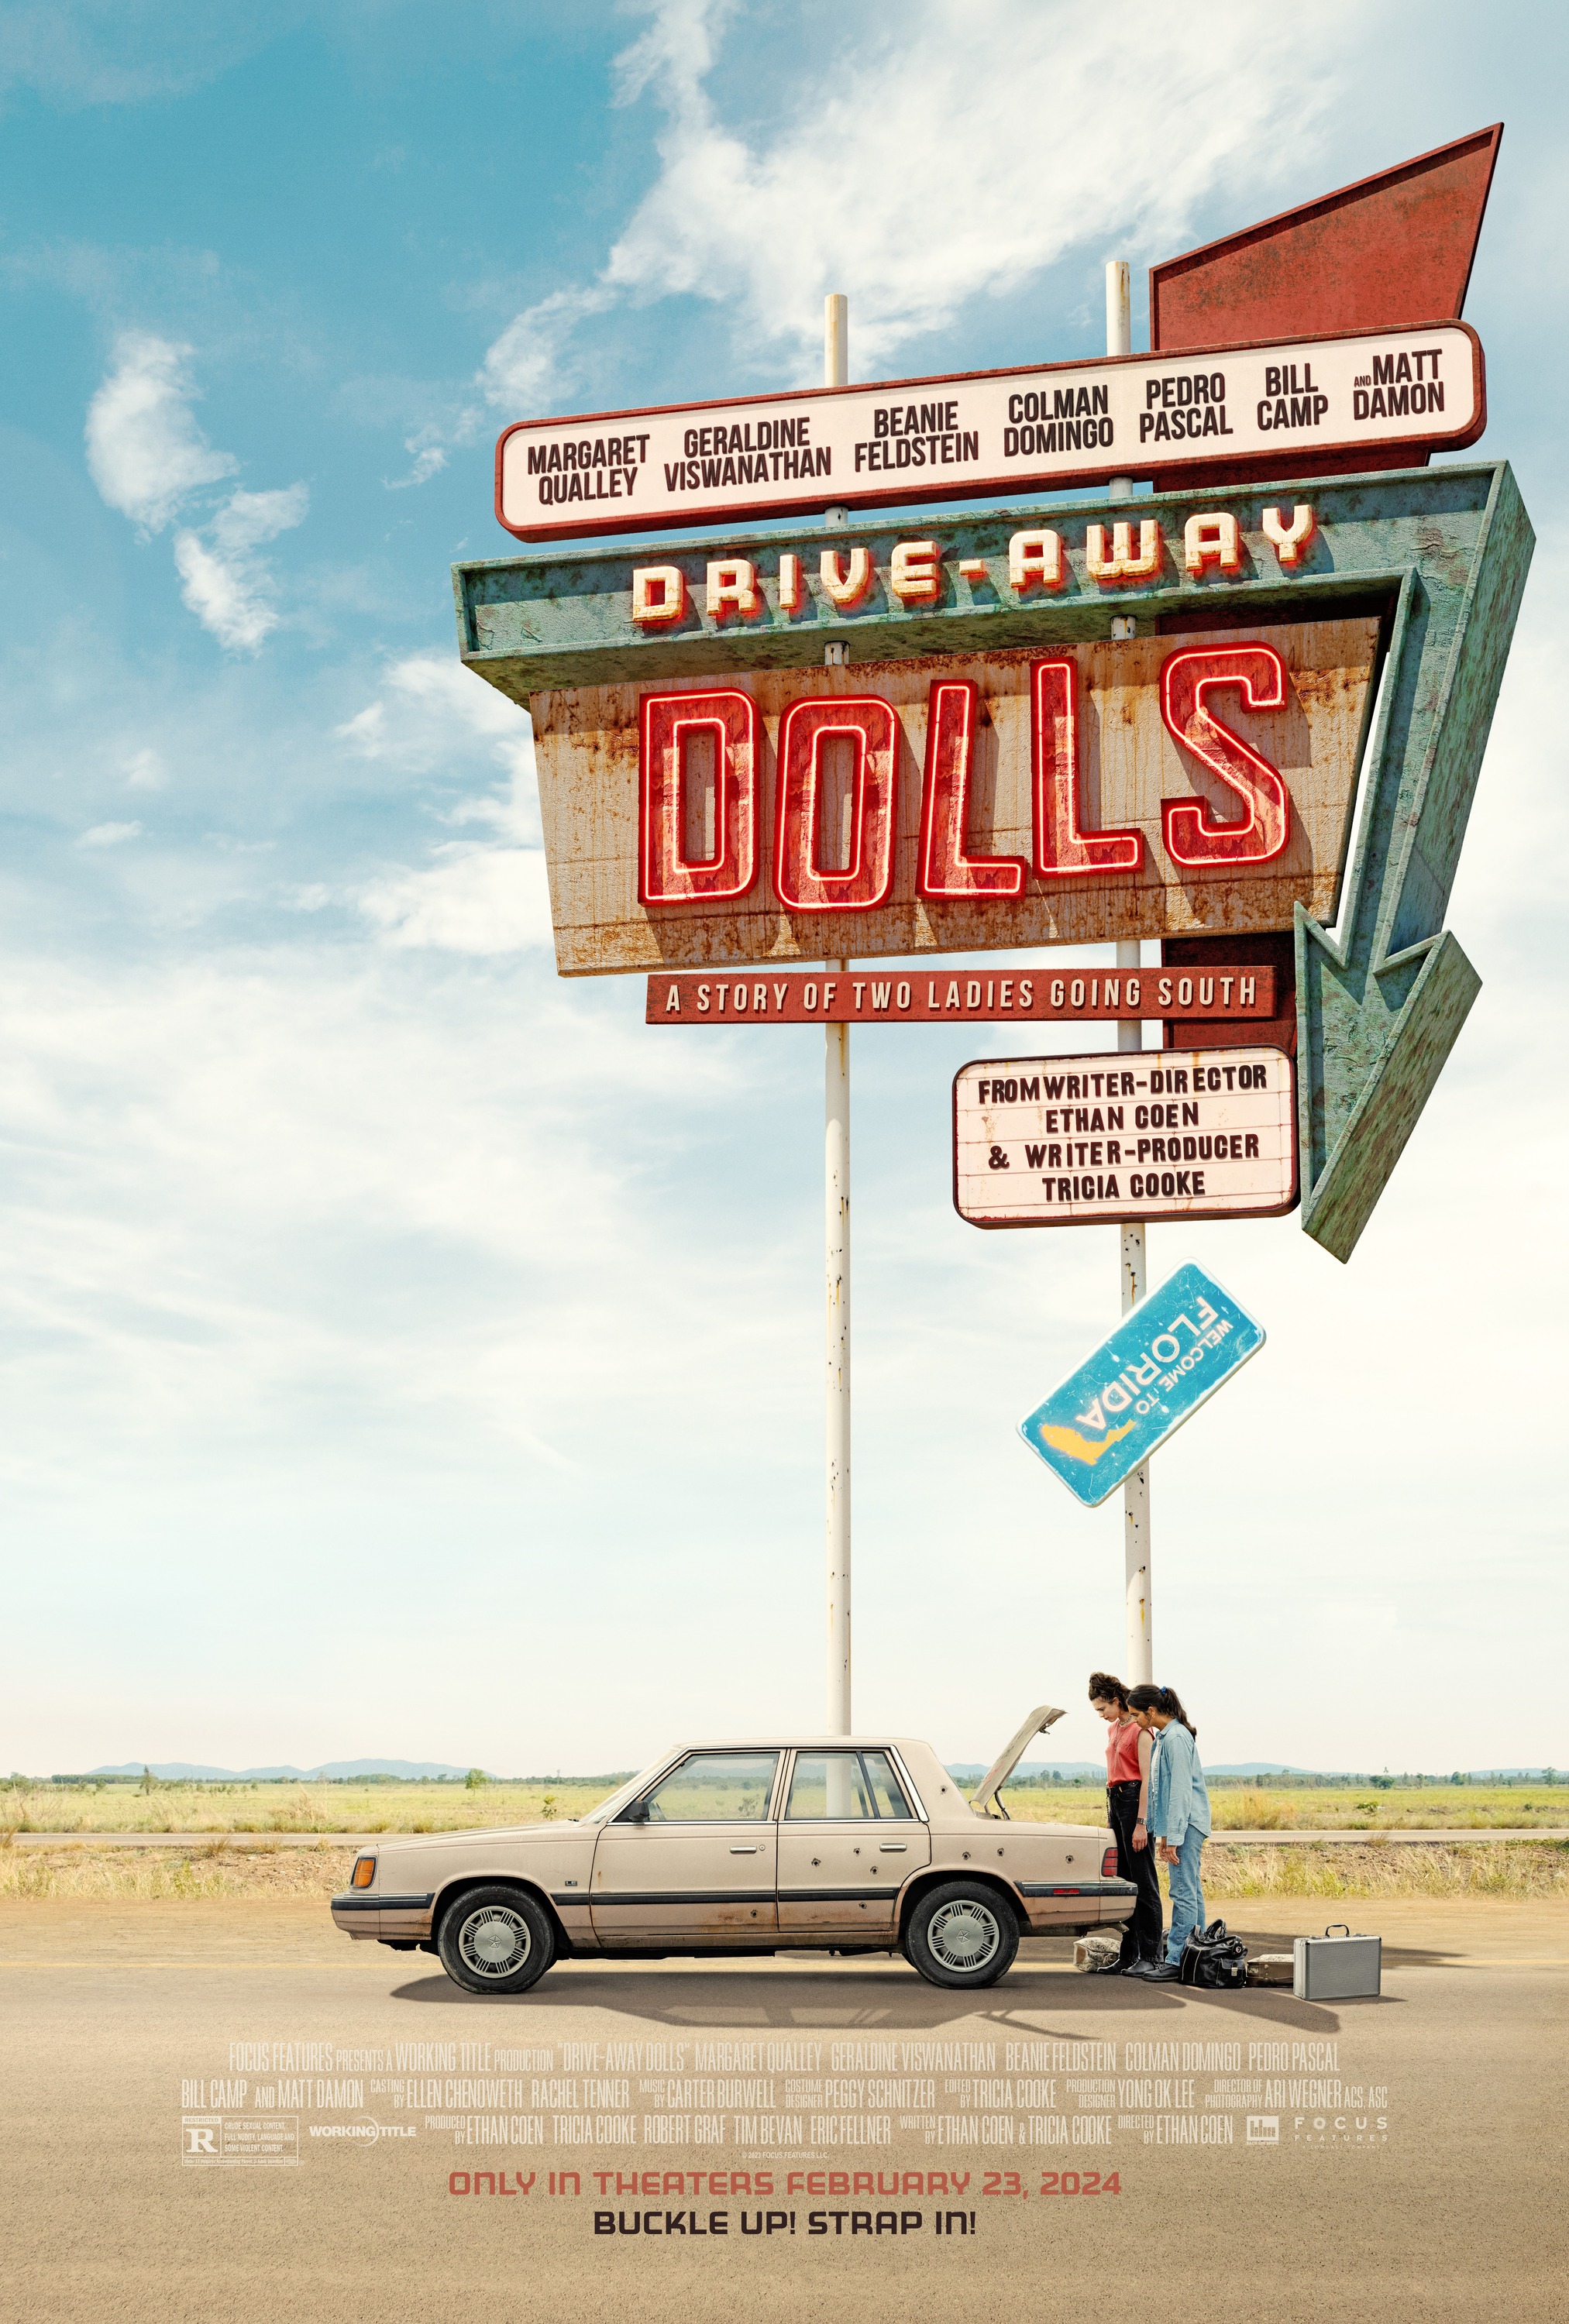 Mega Sized Movie Poster Image for Drive-Away Dolls (#2 of 3)